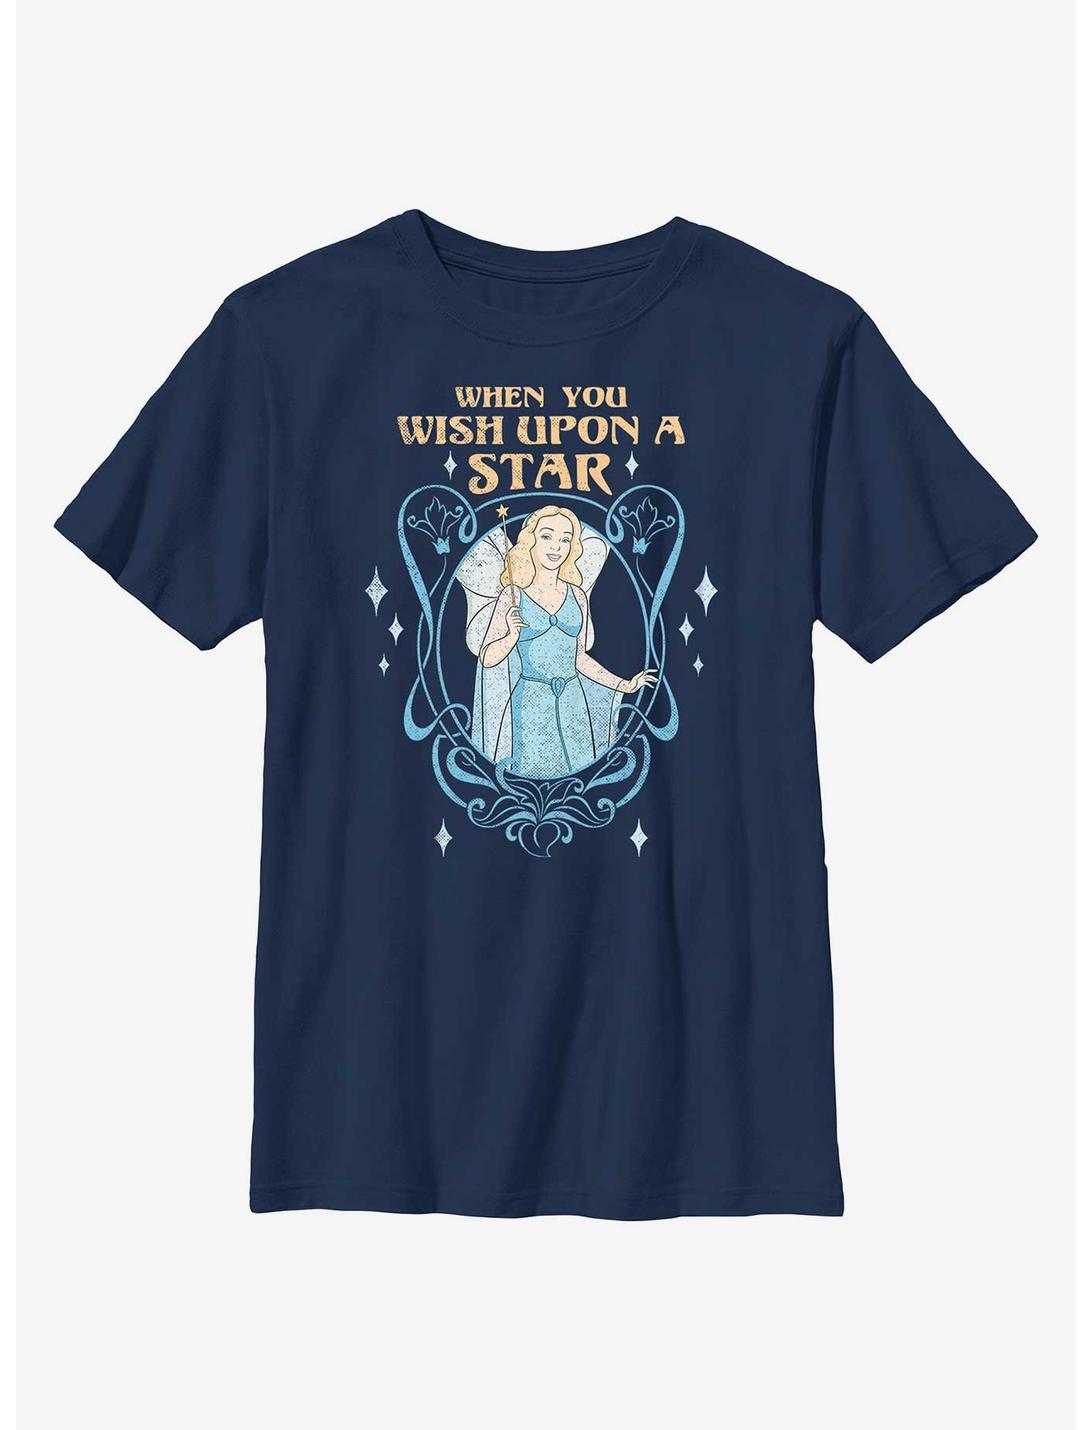 Disney Pinocchio The Blue Fairy Wish Upon A Star Youth T-Shirt, NAVY, hi-res